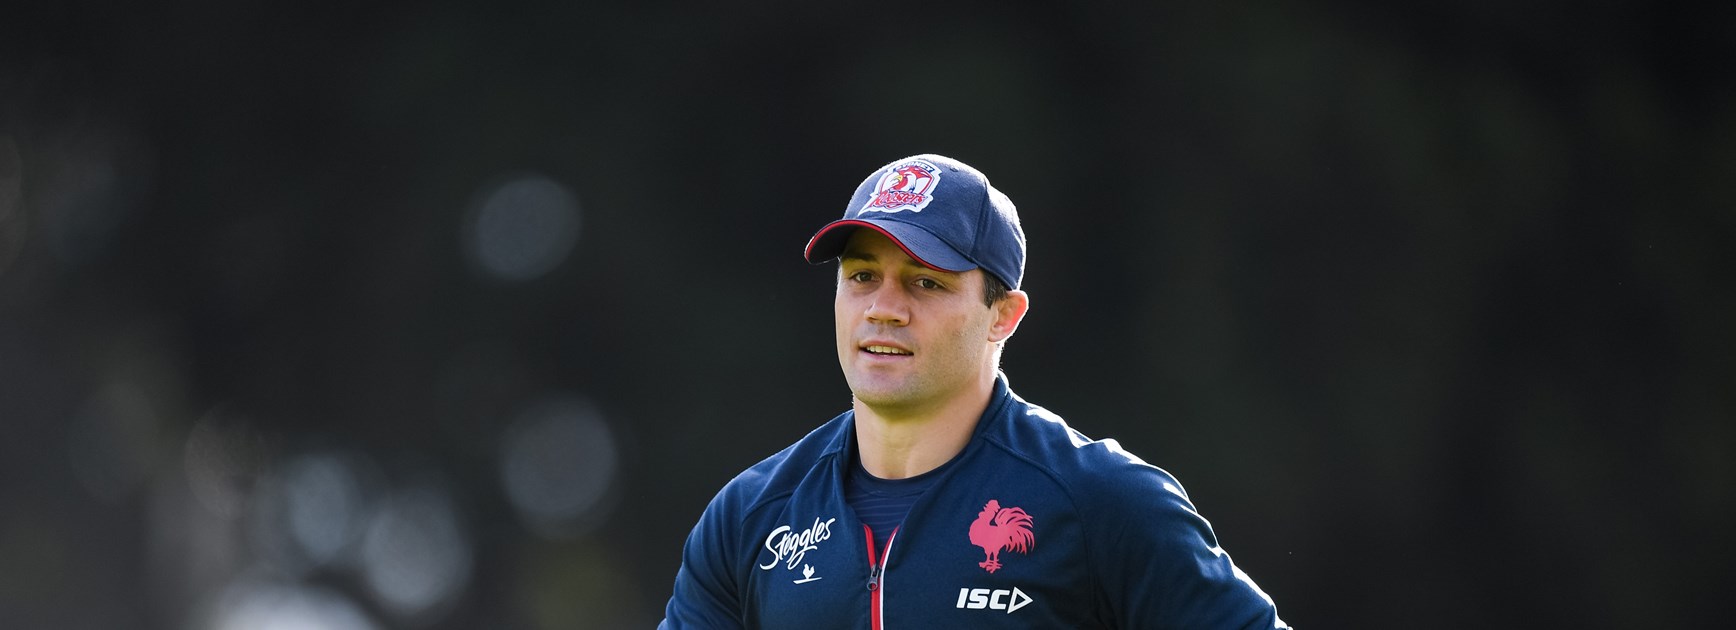 Playing in a dinner suit: How clever Cronk minimises contact